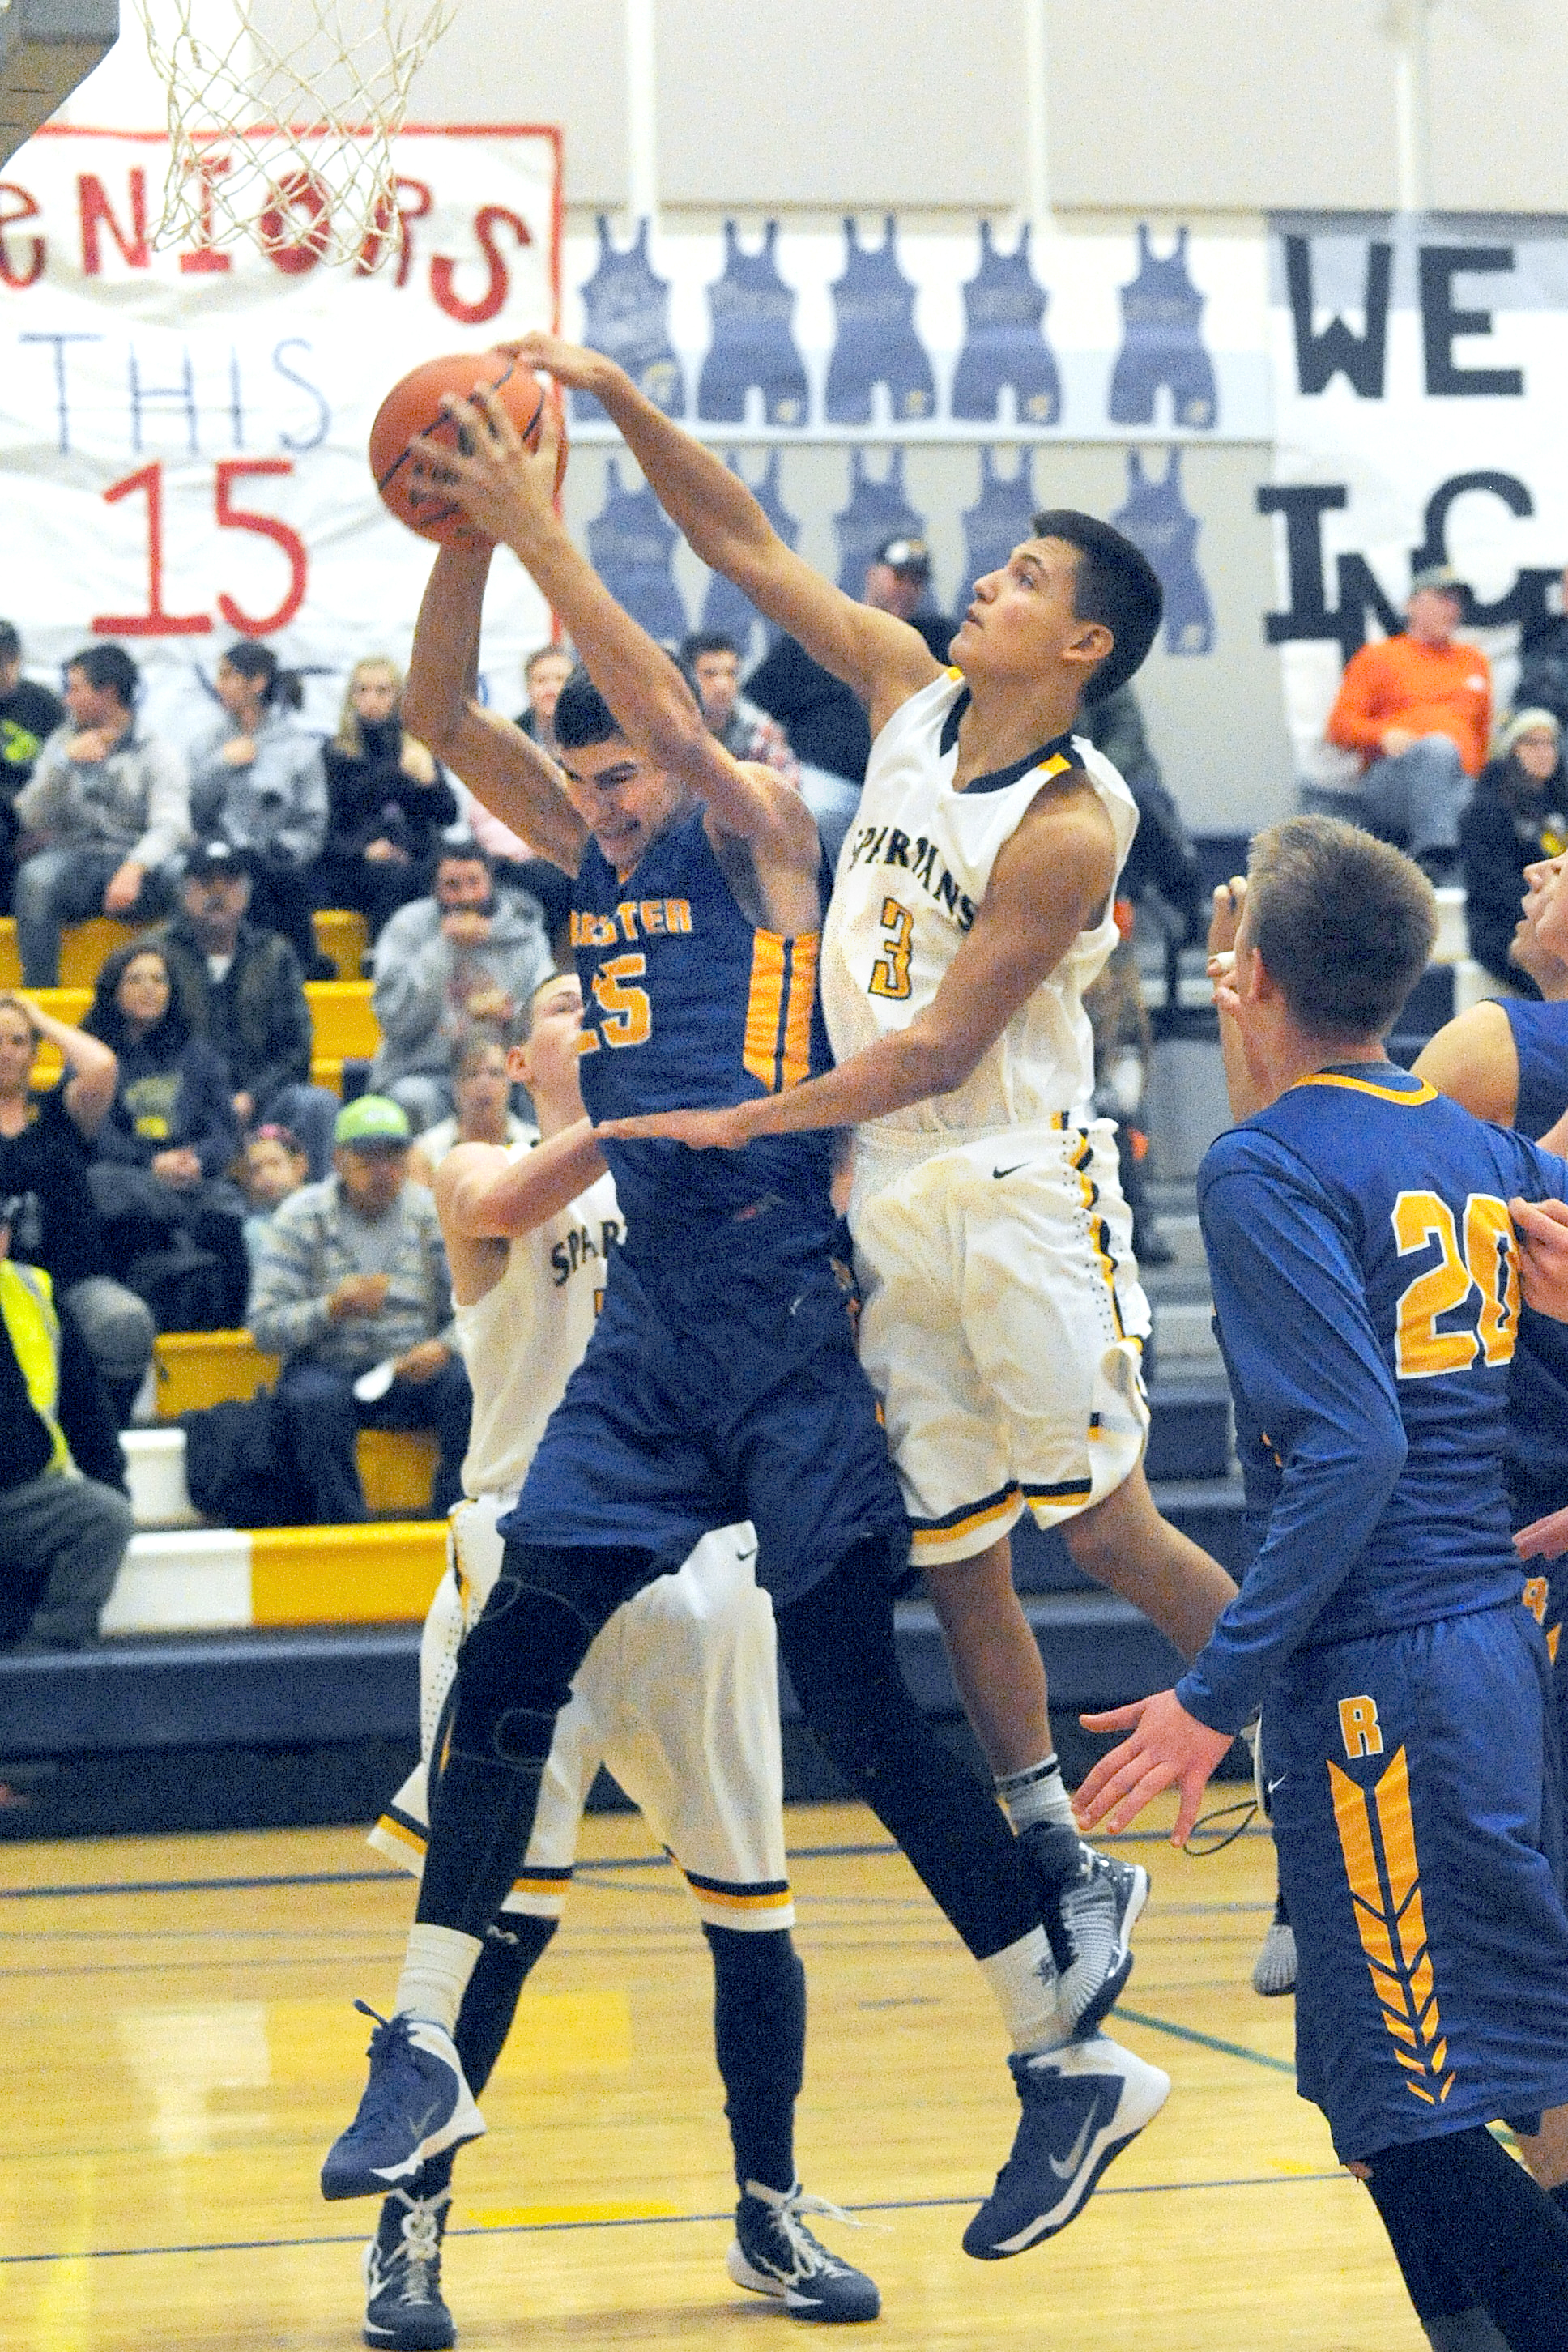 Forks' Keishaun Ramsey (3) challenges Rochester's Josh Kennedy (25) for the rebound Tuesday in Forks The Warriors defeated the Spartans 58-50. Lonnie Archibald/for Peninsula Daily News